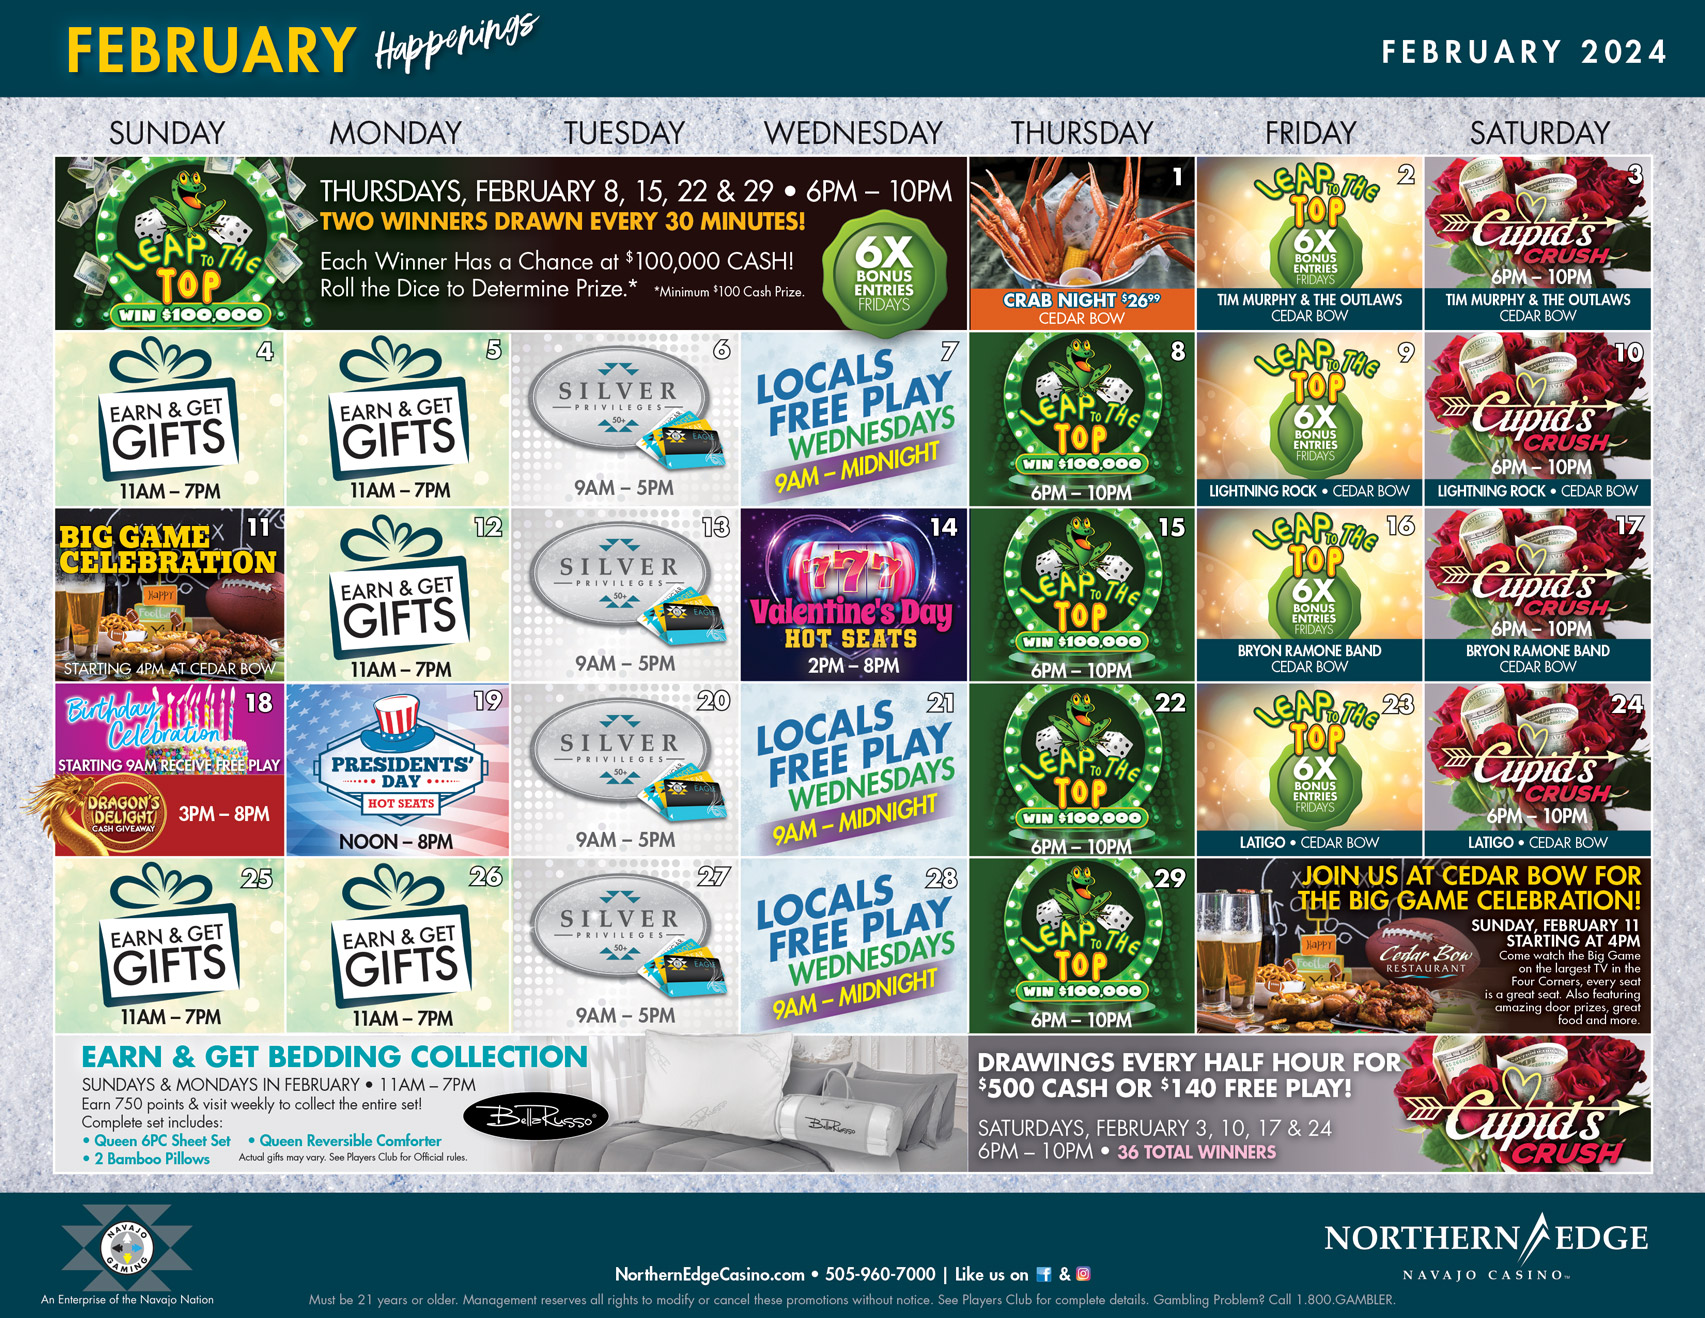 February Promotions at Northern Edge Navajo Casino